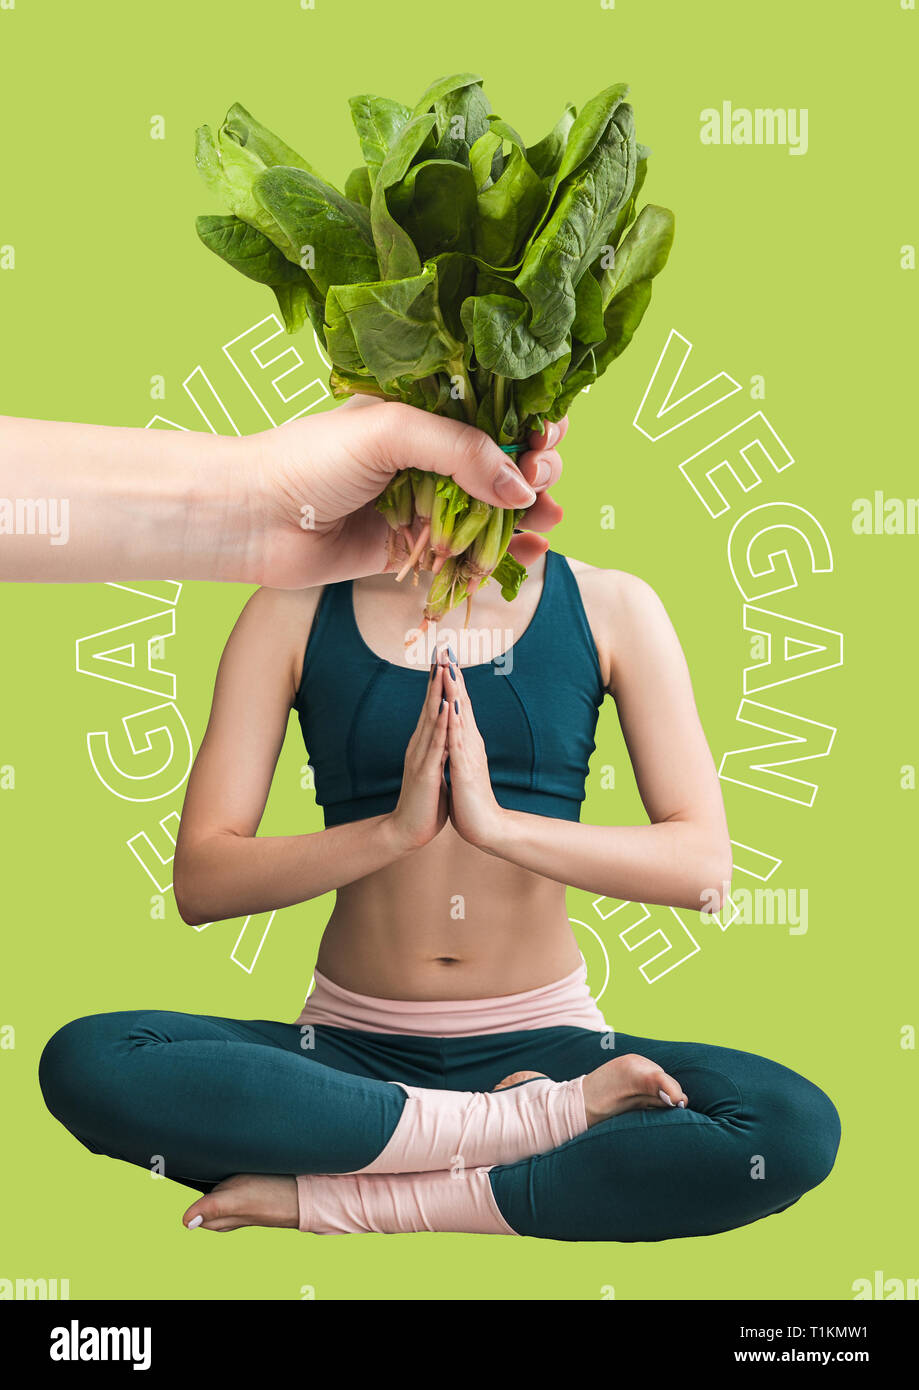 Green-head girl, natural curvy thoughts. Woman sitting in lotos position on the floor. Modern art collage, healthy and nature-friendly lifestyle concept. Diet, yoga, detox make her body wellness. Stock Photo